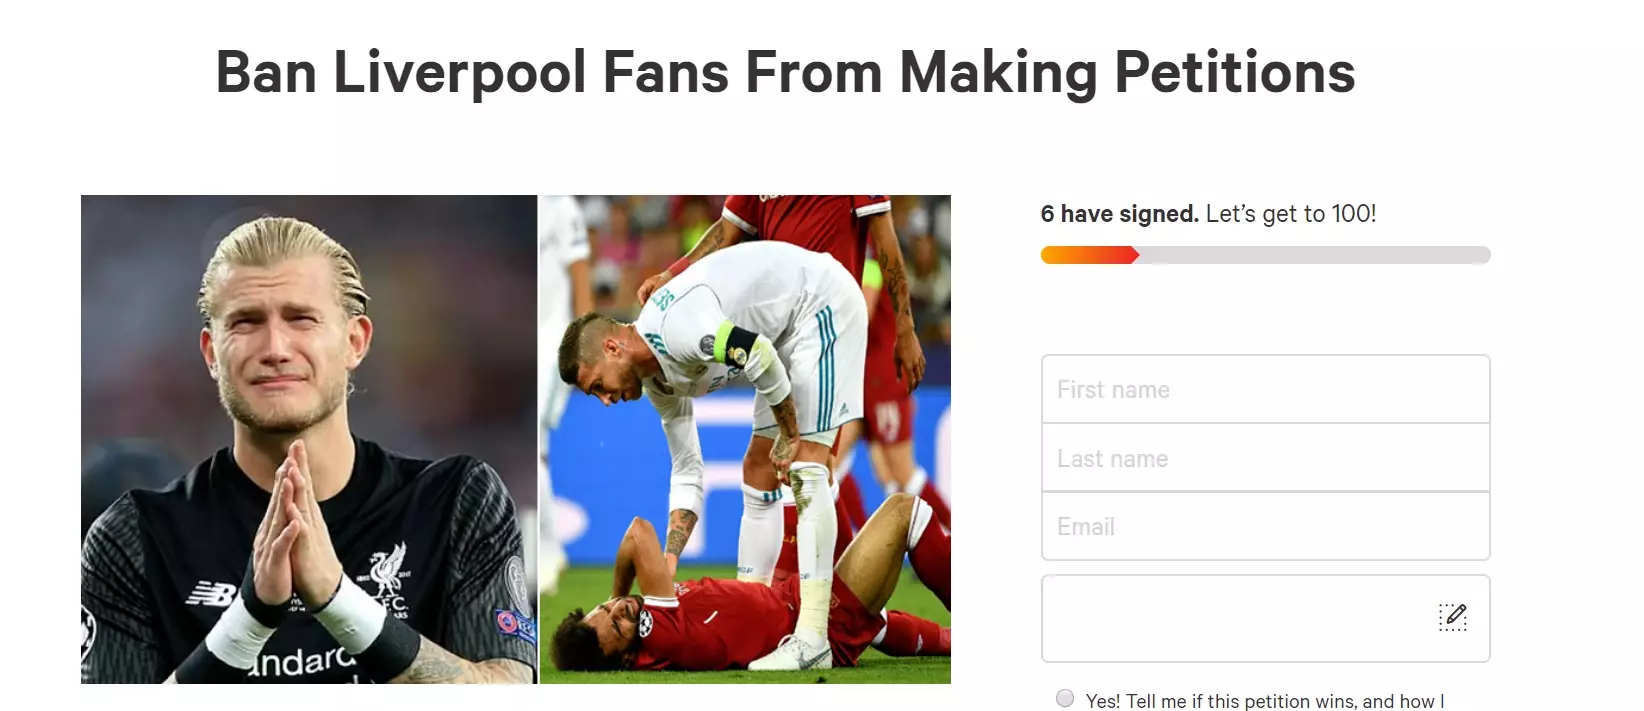 The petition to stop Liverpool fans starting petitions. Image: Change.org